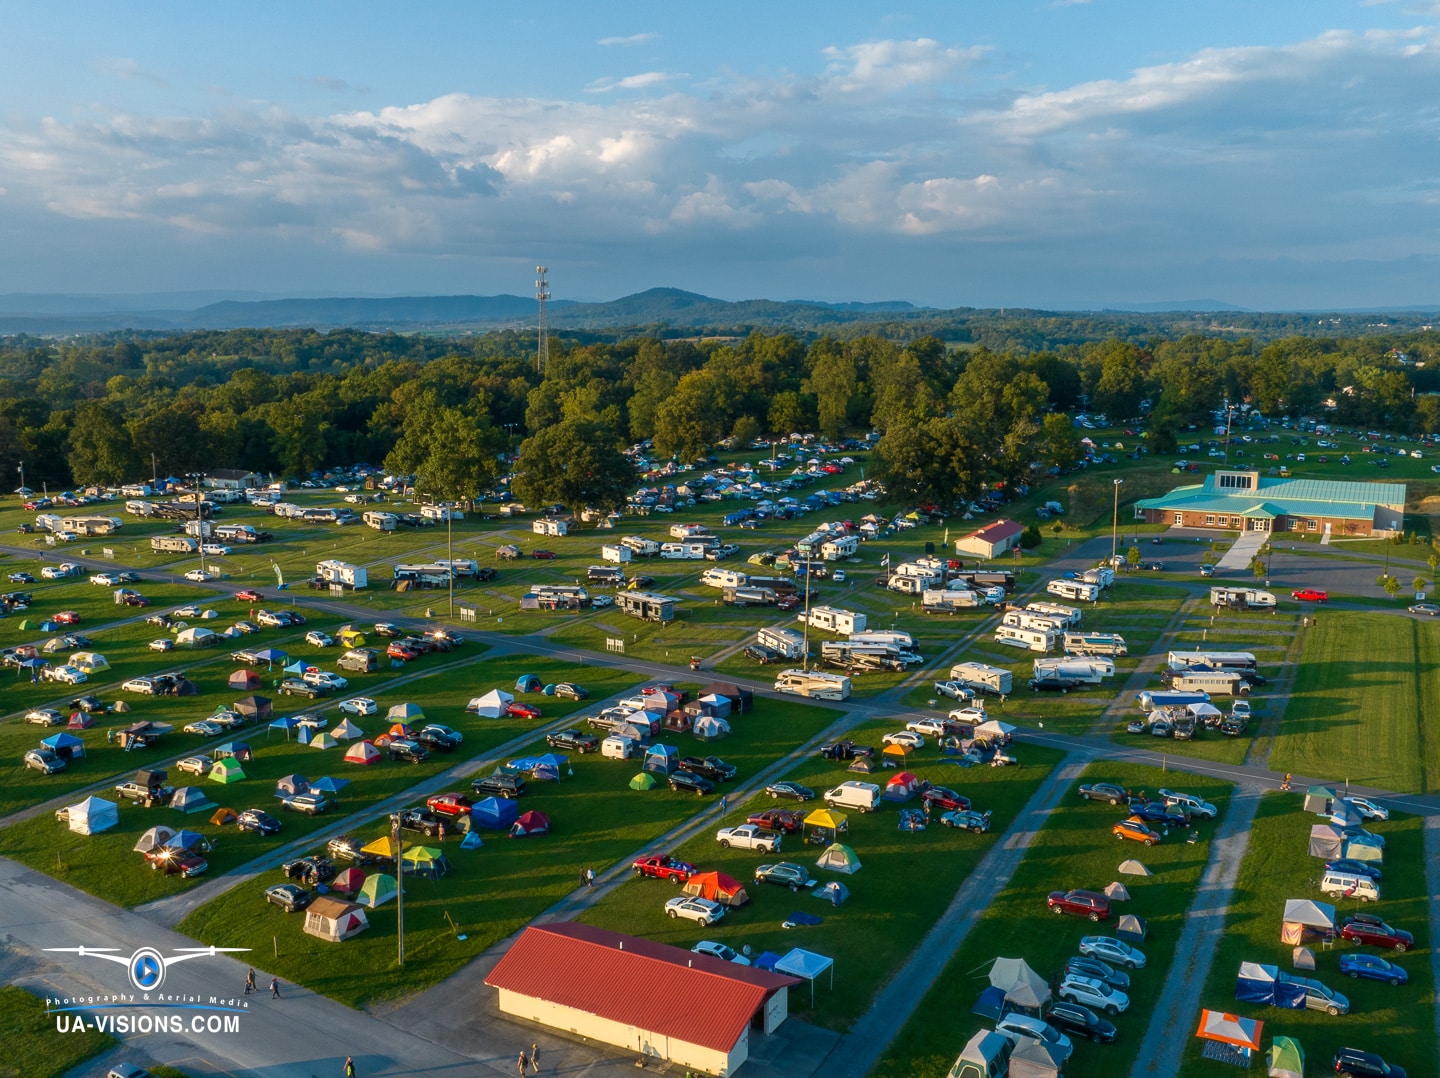 Aerial shot of the Healing Appalachia festival, a patchwork of tents and nature in harmony.